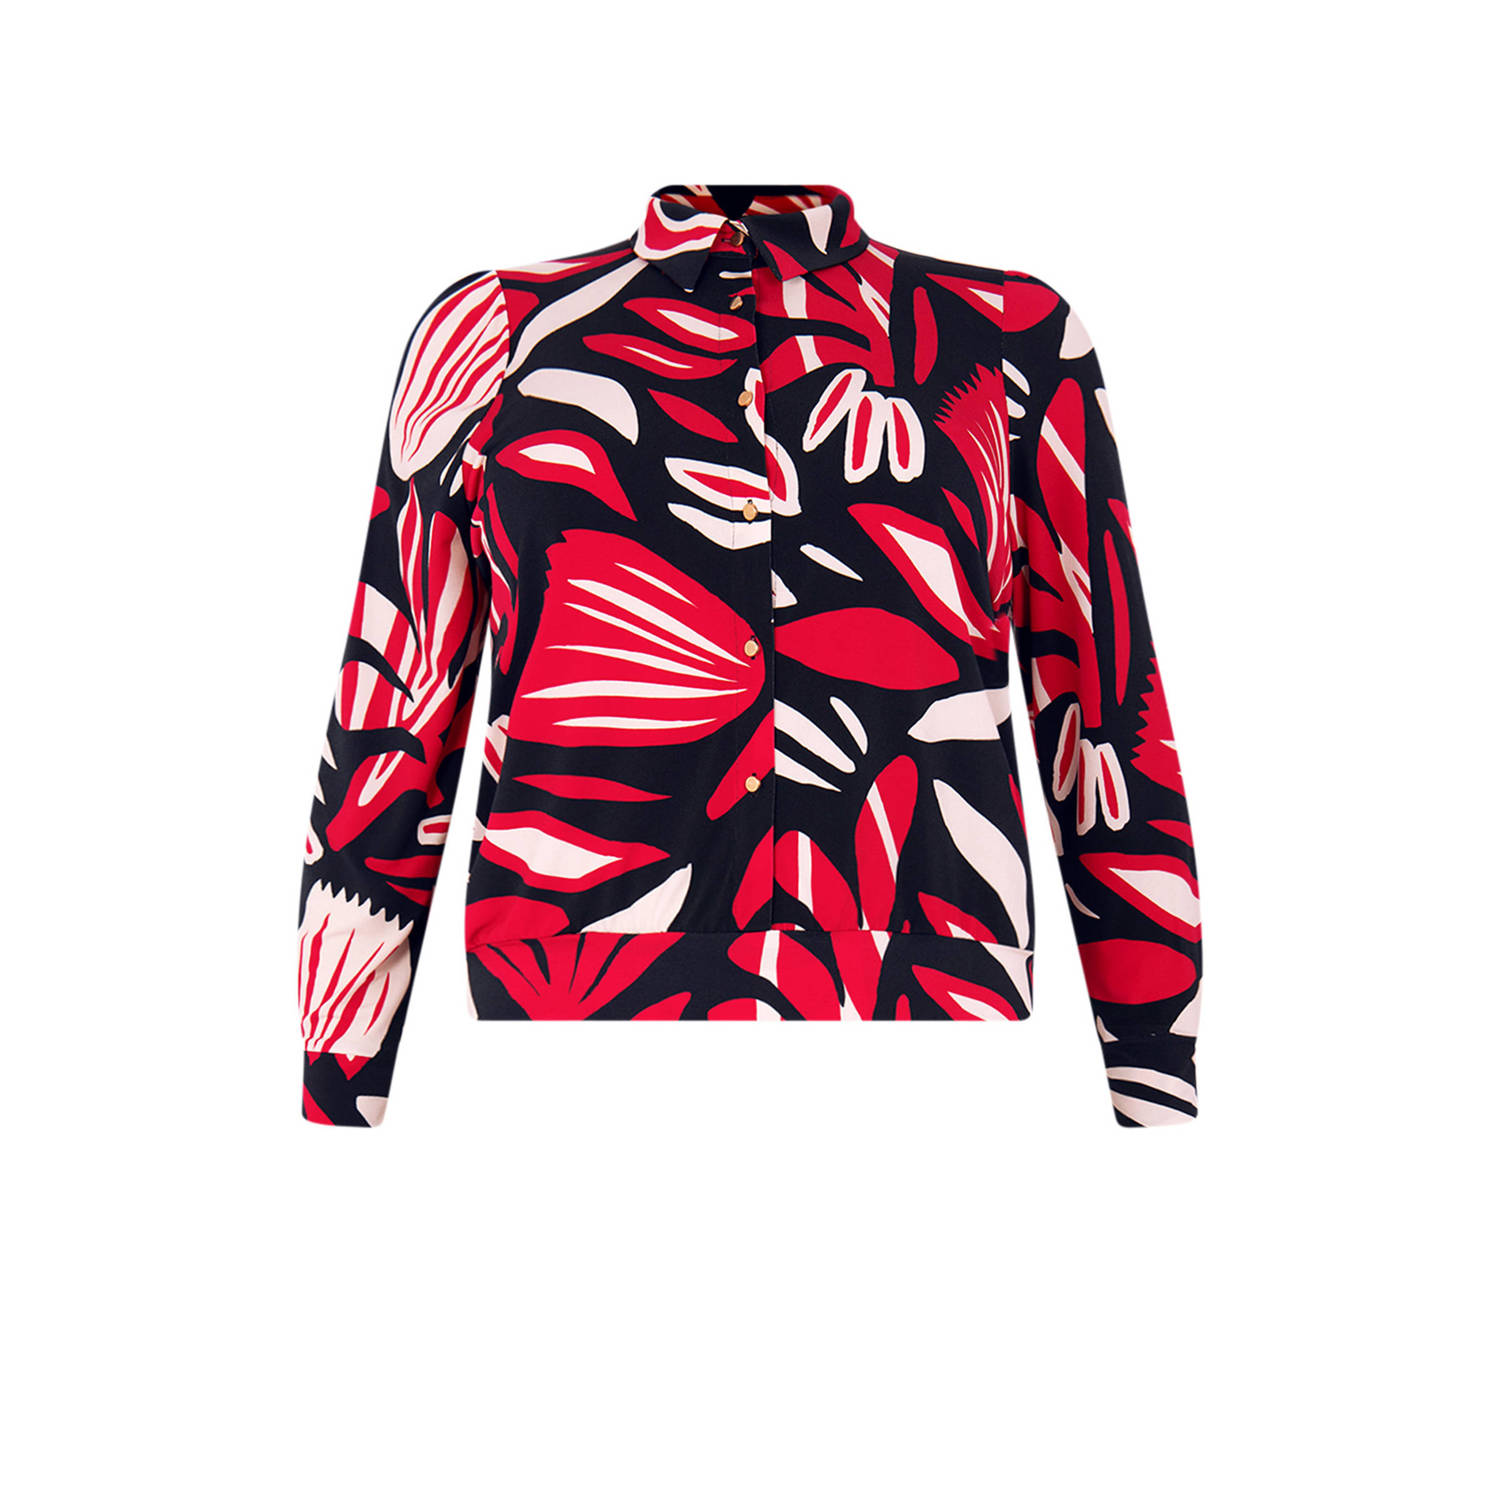 Yoek blouse DOLCE met all over print rood donkerblauw wit